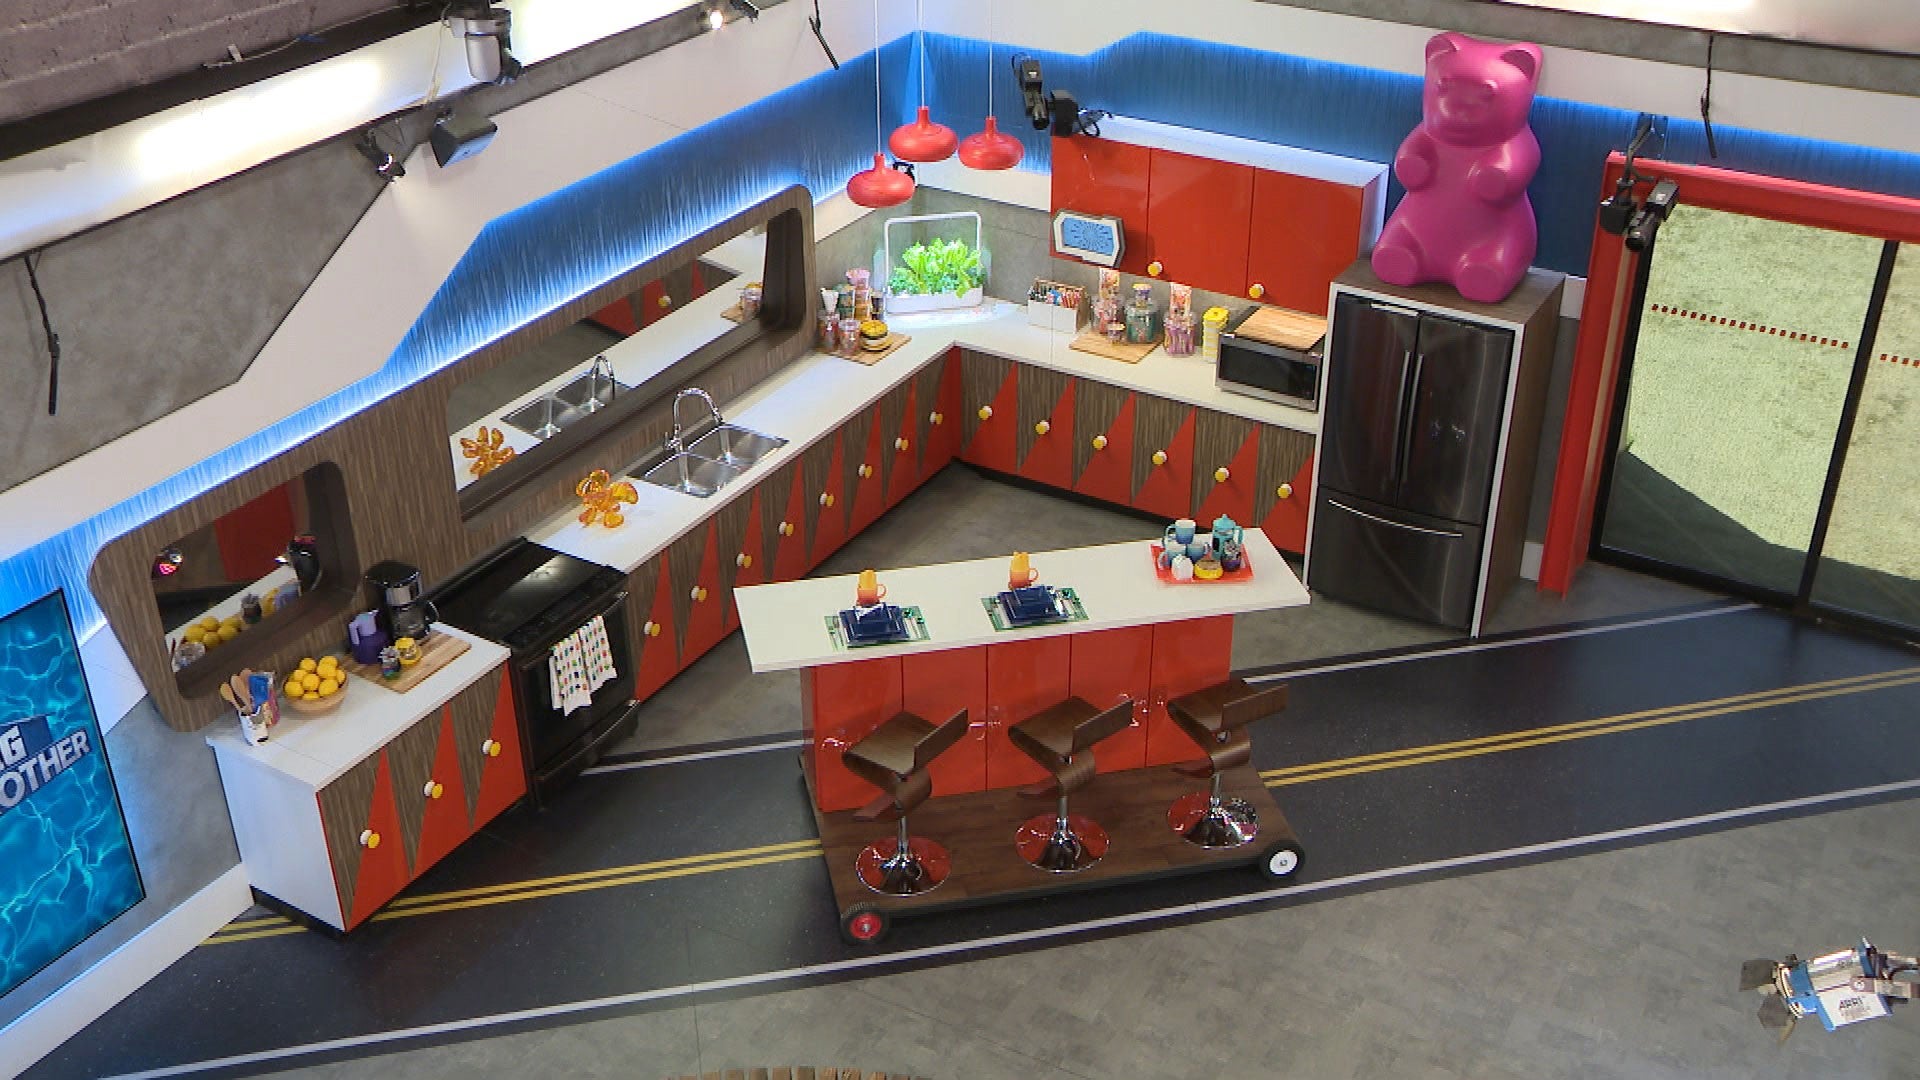 Take an Exclusive Tour of the 'Big Brother' Season 20 House